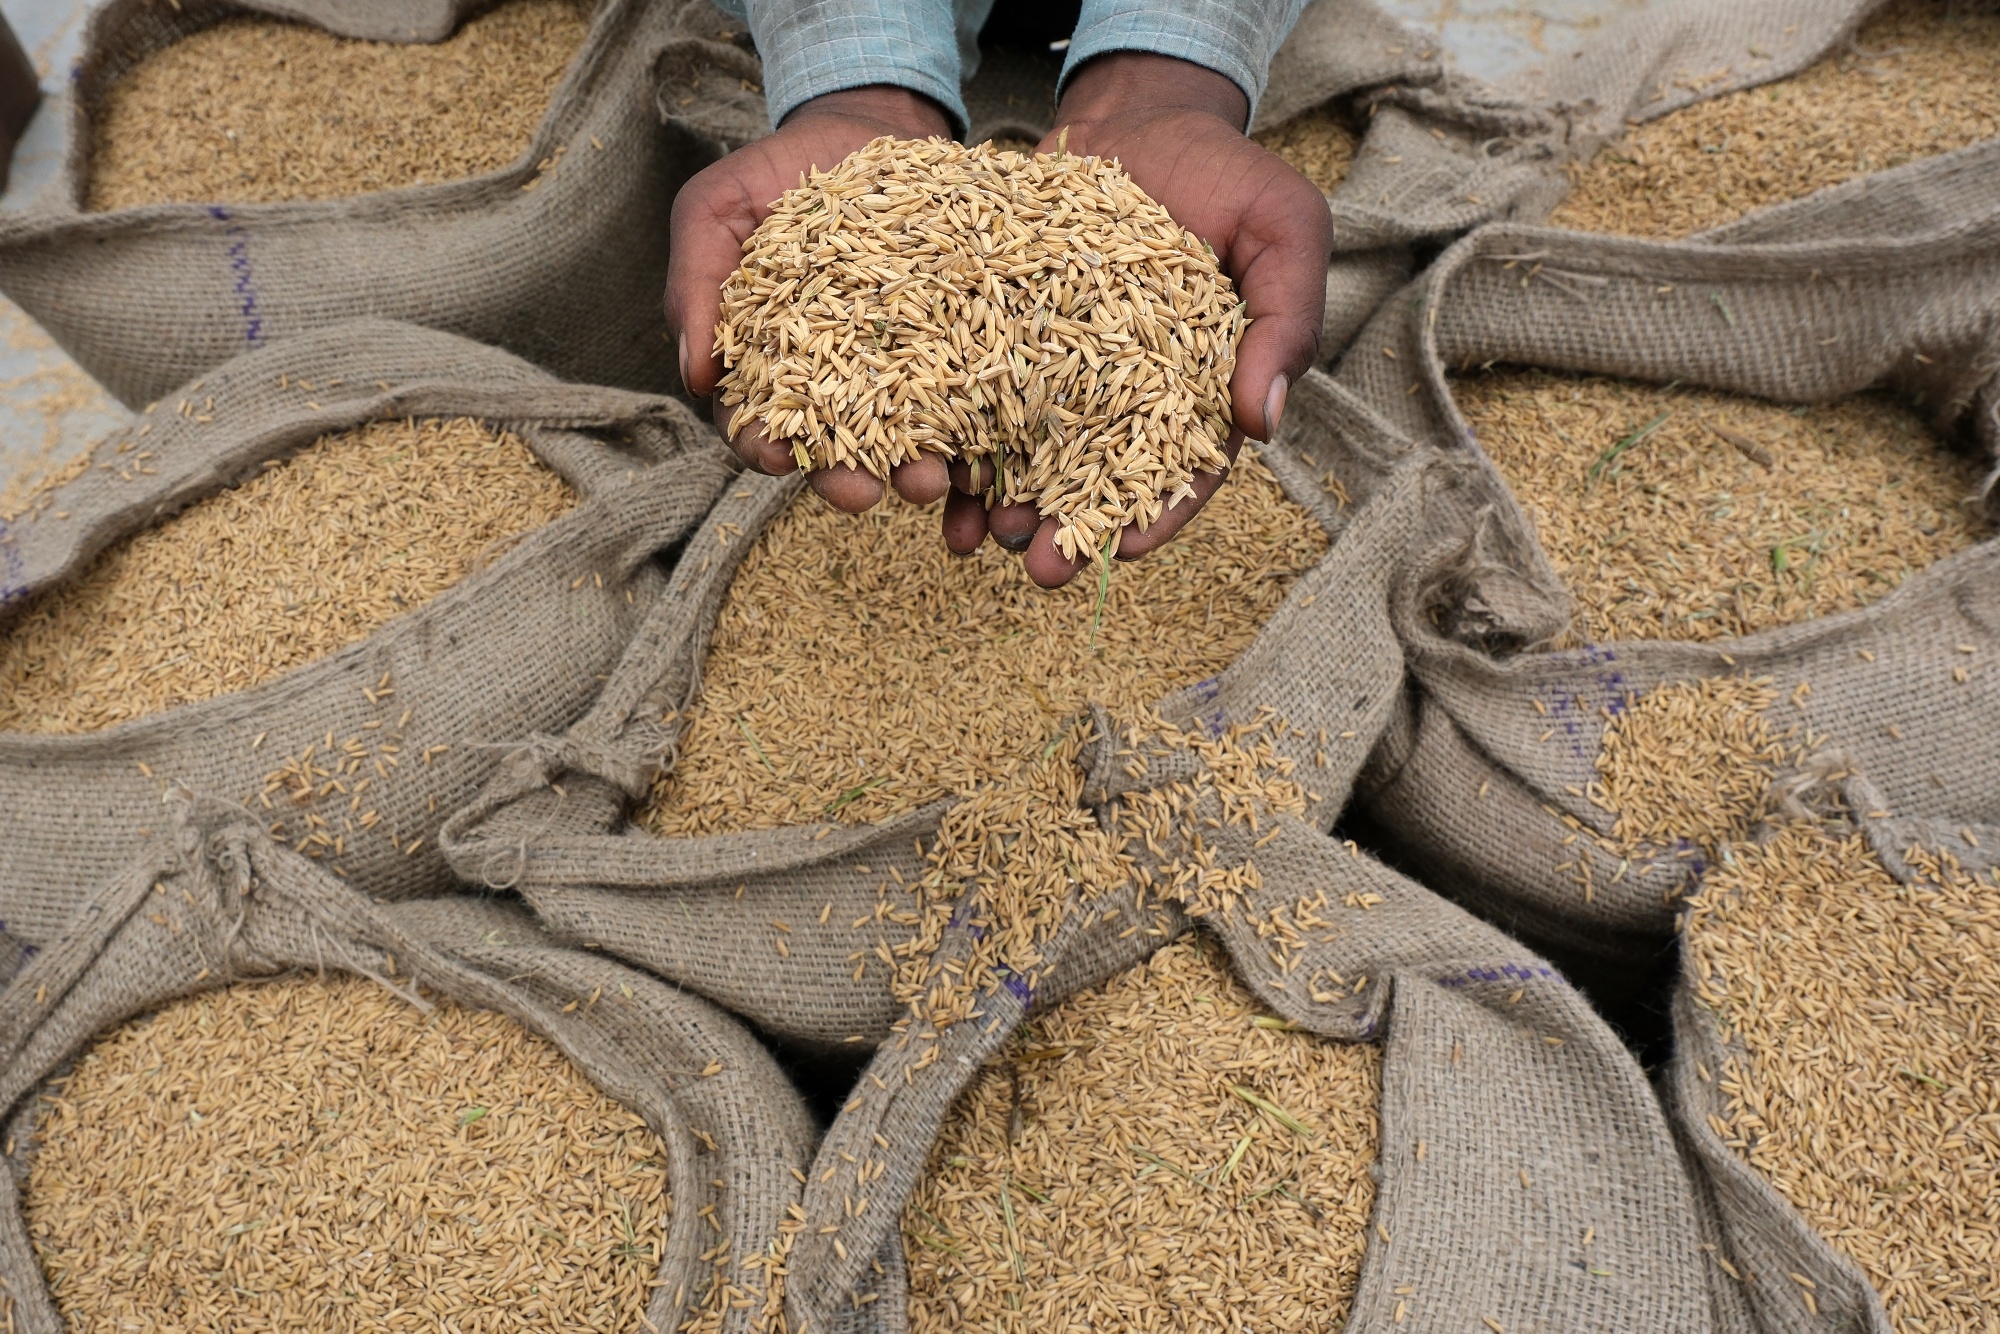 India Tightens Rice Exports in Threat to Global Food Prices - Bloomberg